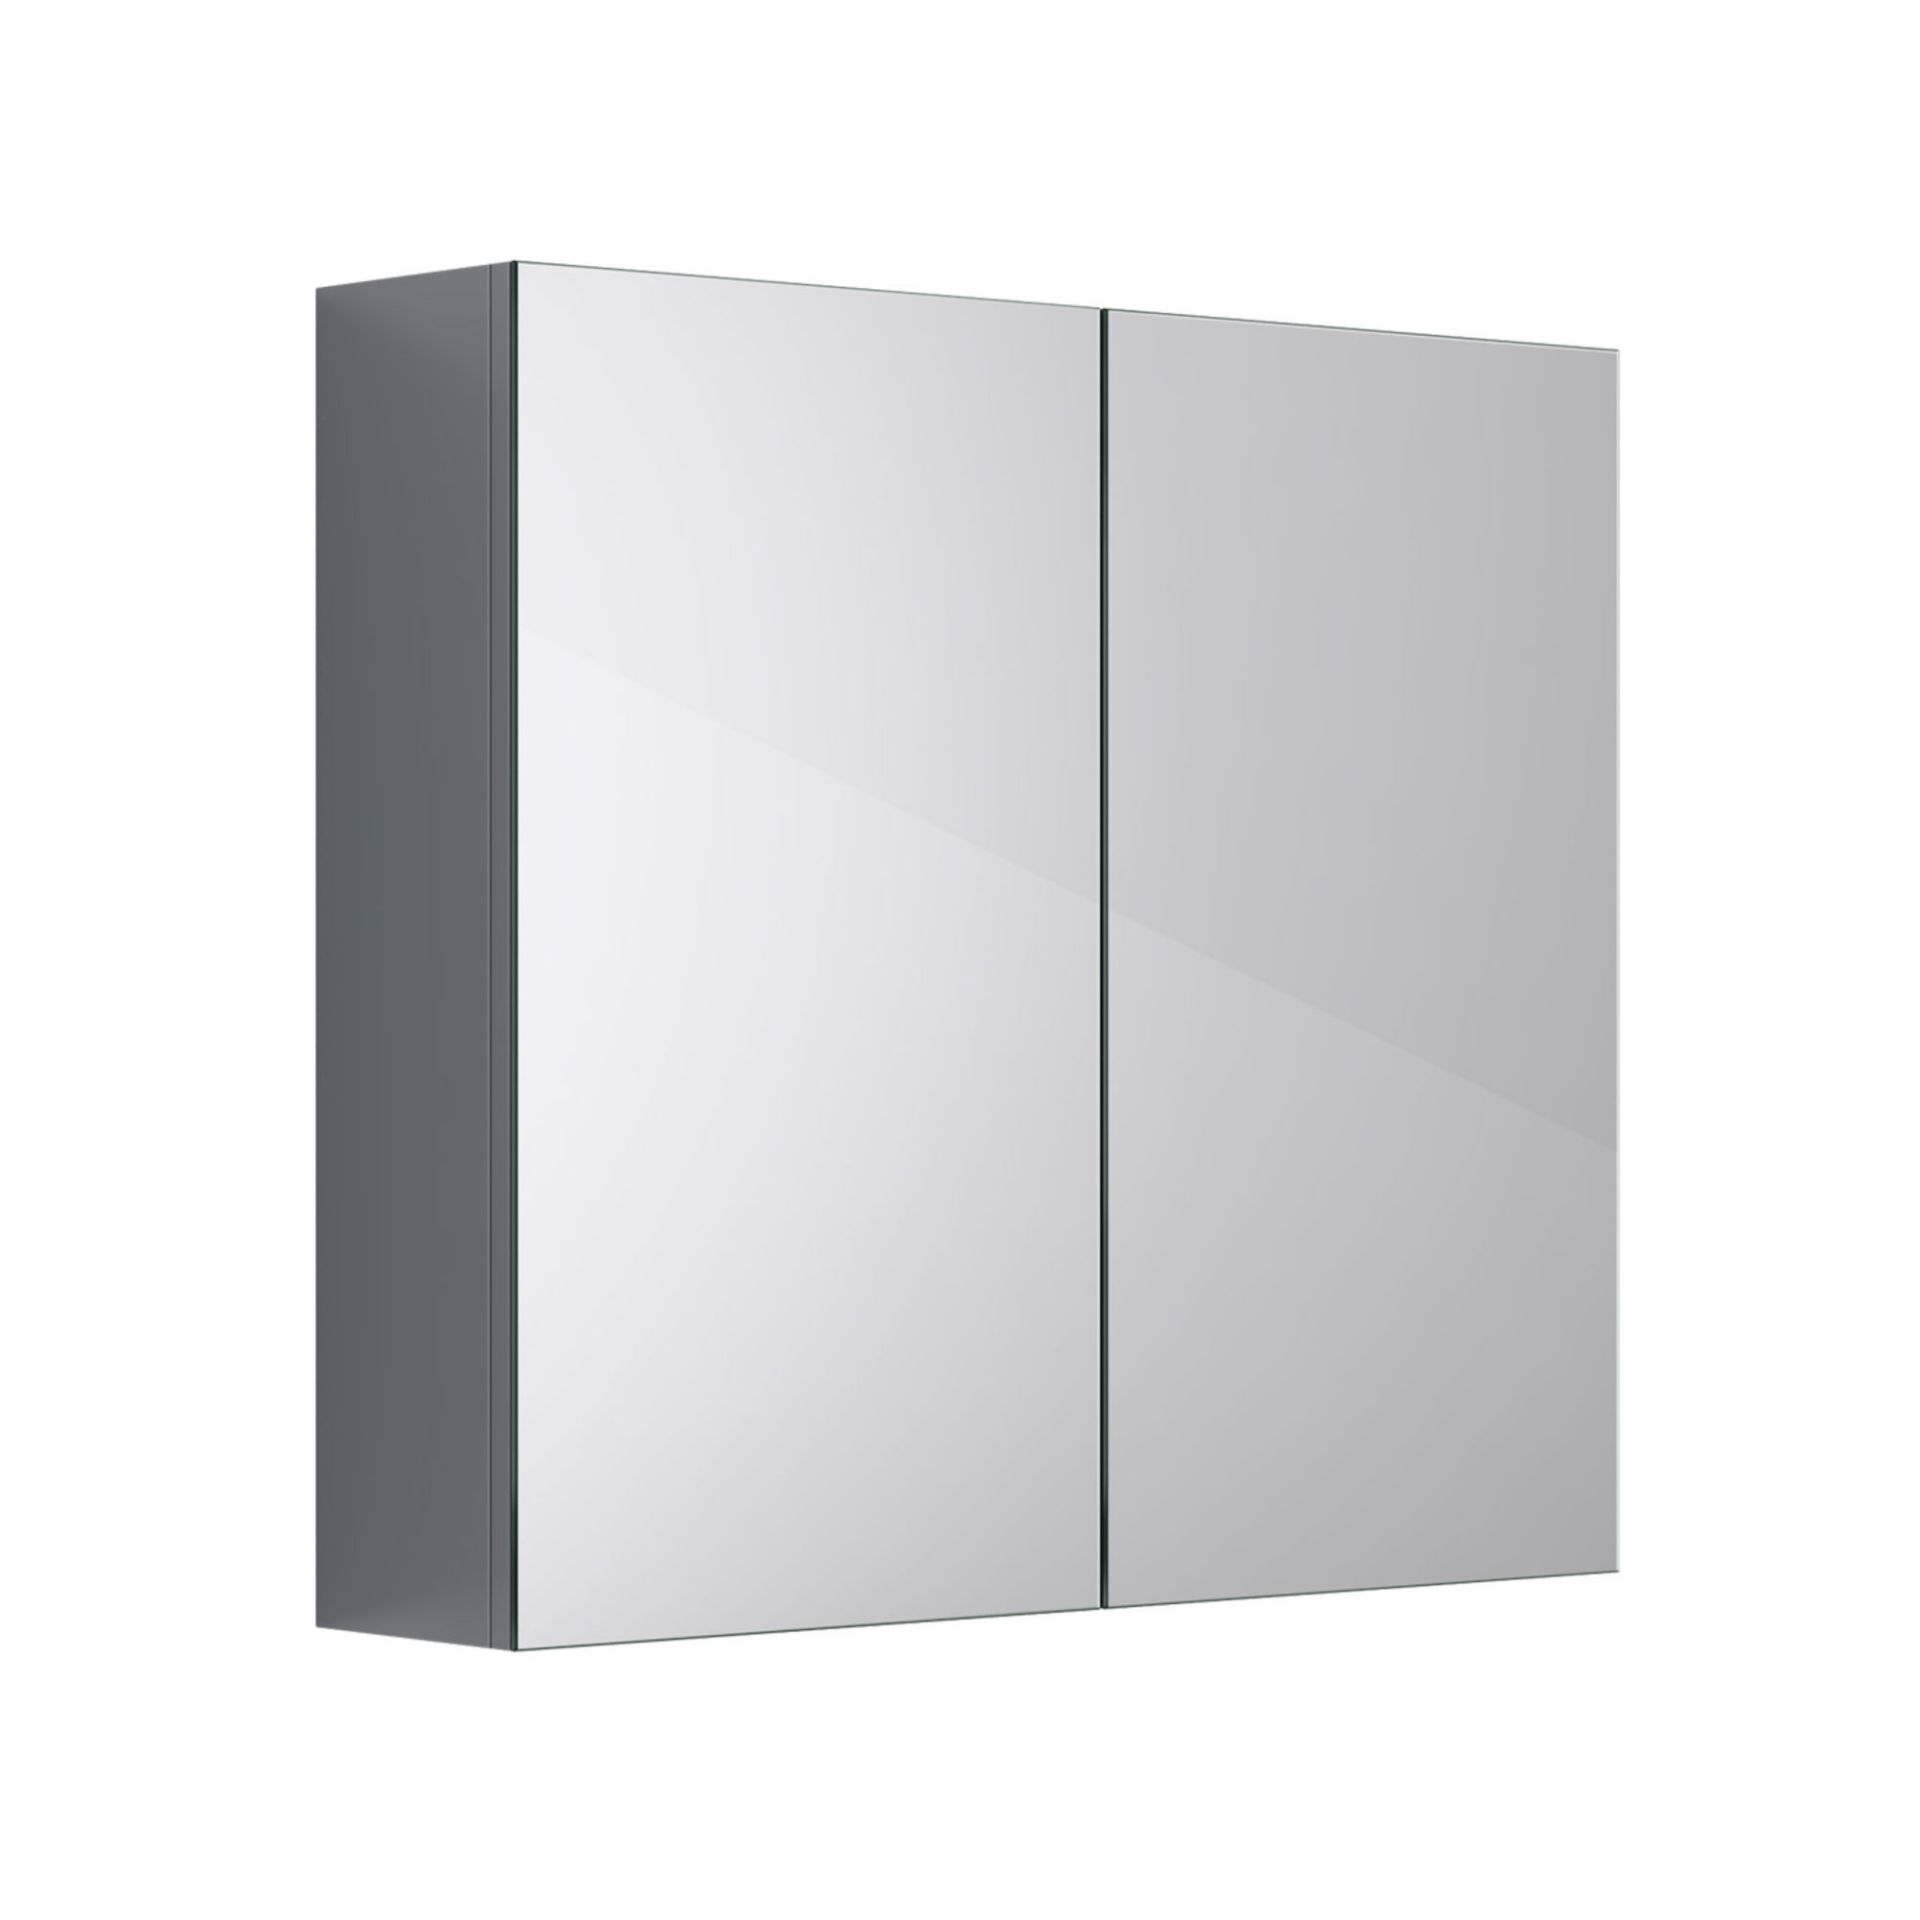 (XM91) 667mm Harper Gloss Grey Double Door Mirror Cabinet. RRP £299.99. Part of our Flat Pack